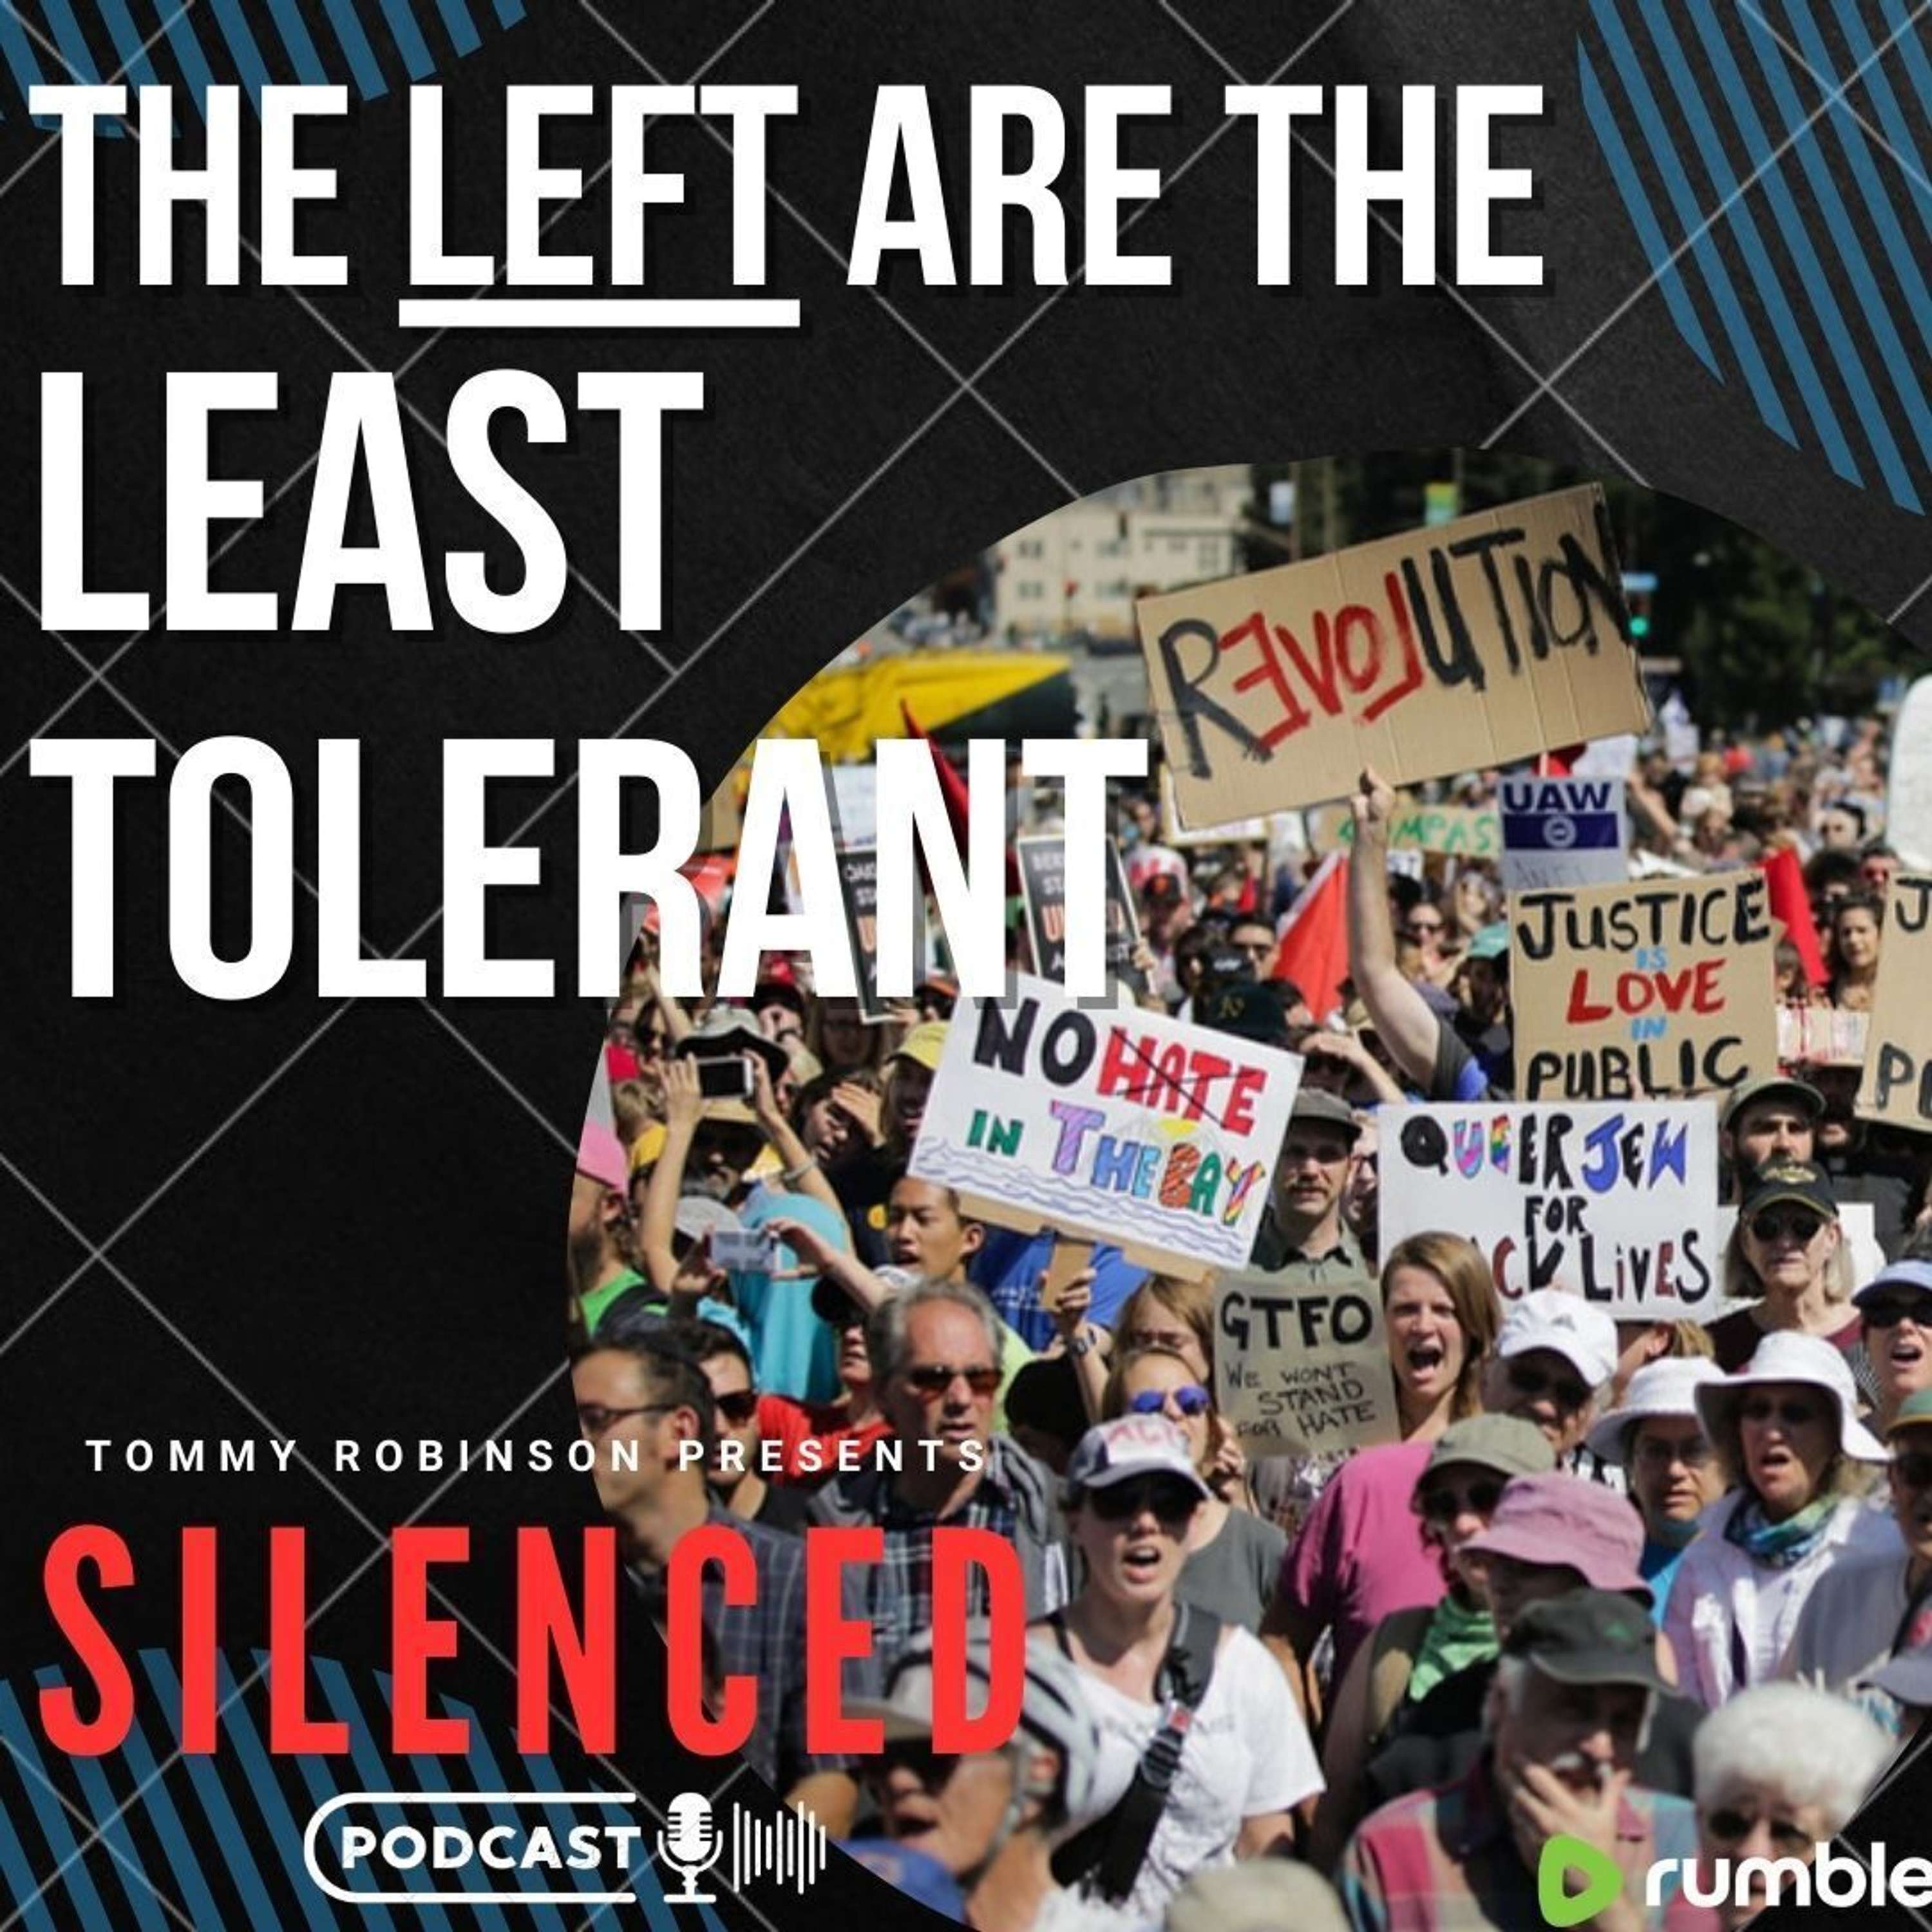 THE LEFT ARE THE LEAST TOLERANT